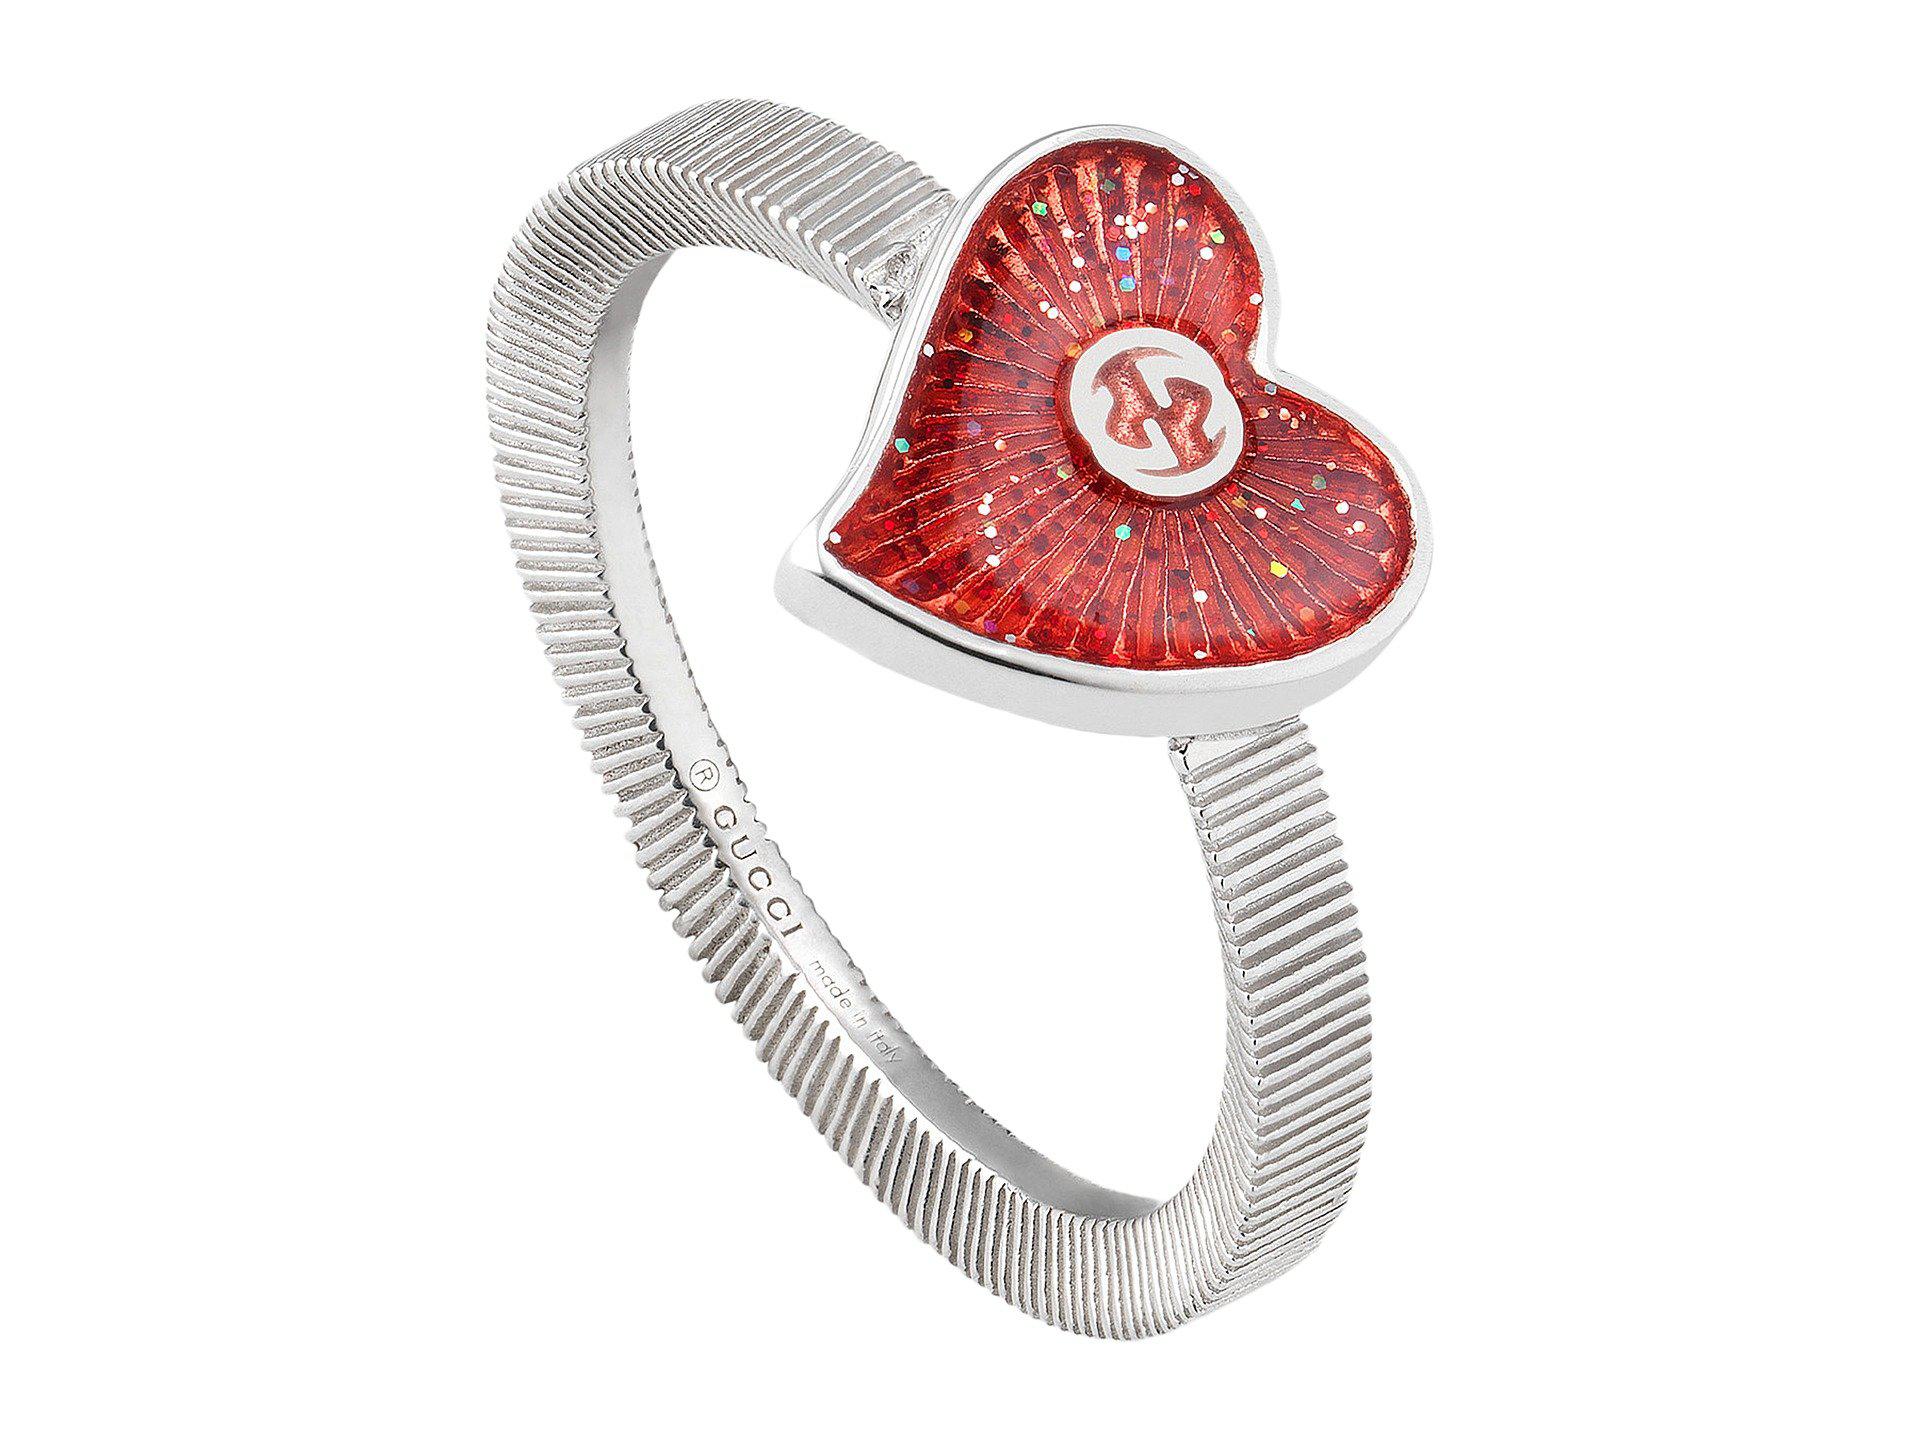 heart gucci ring